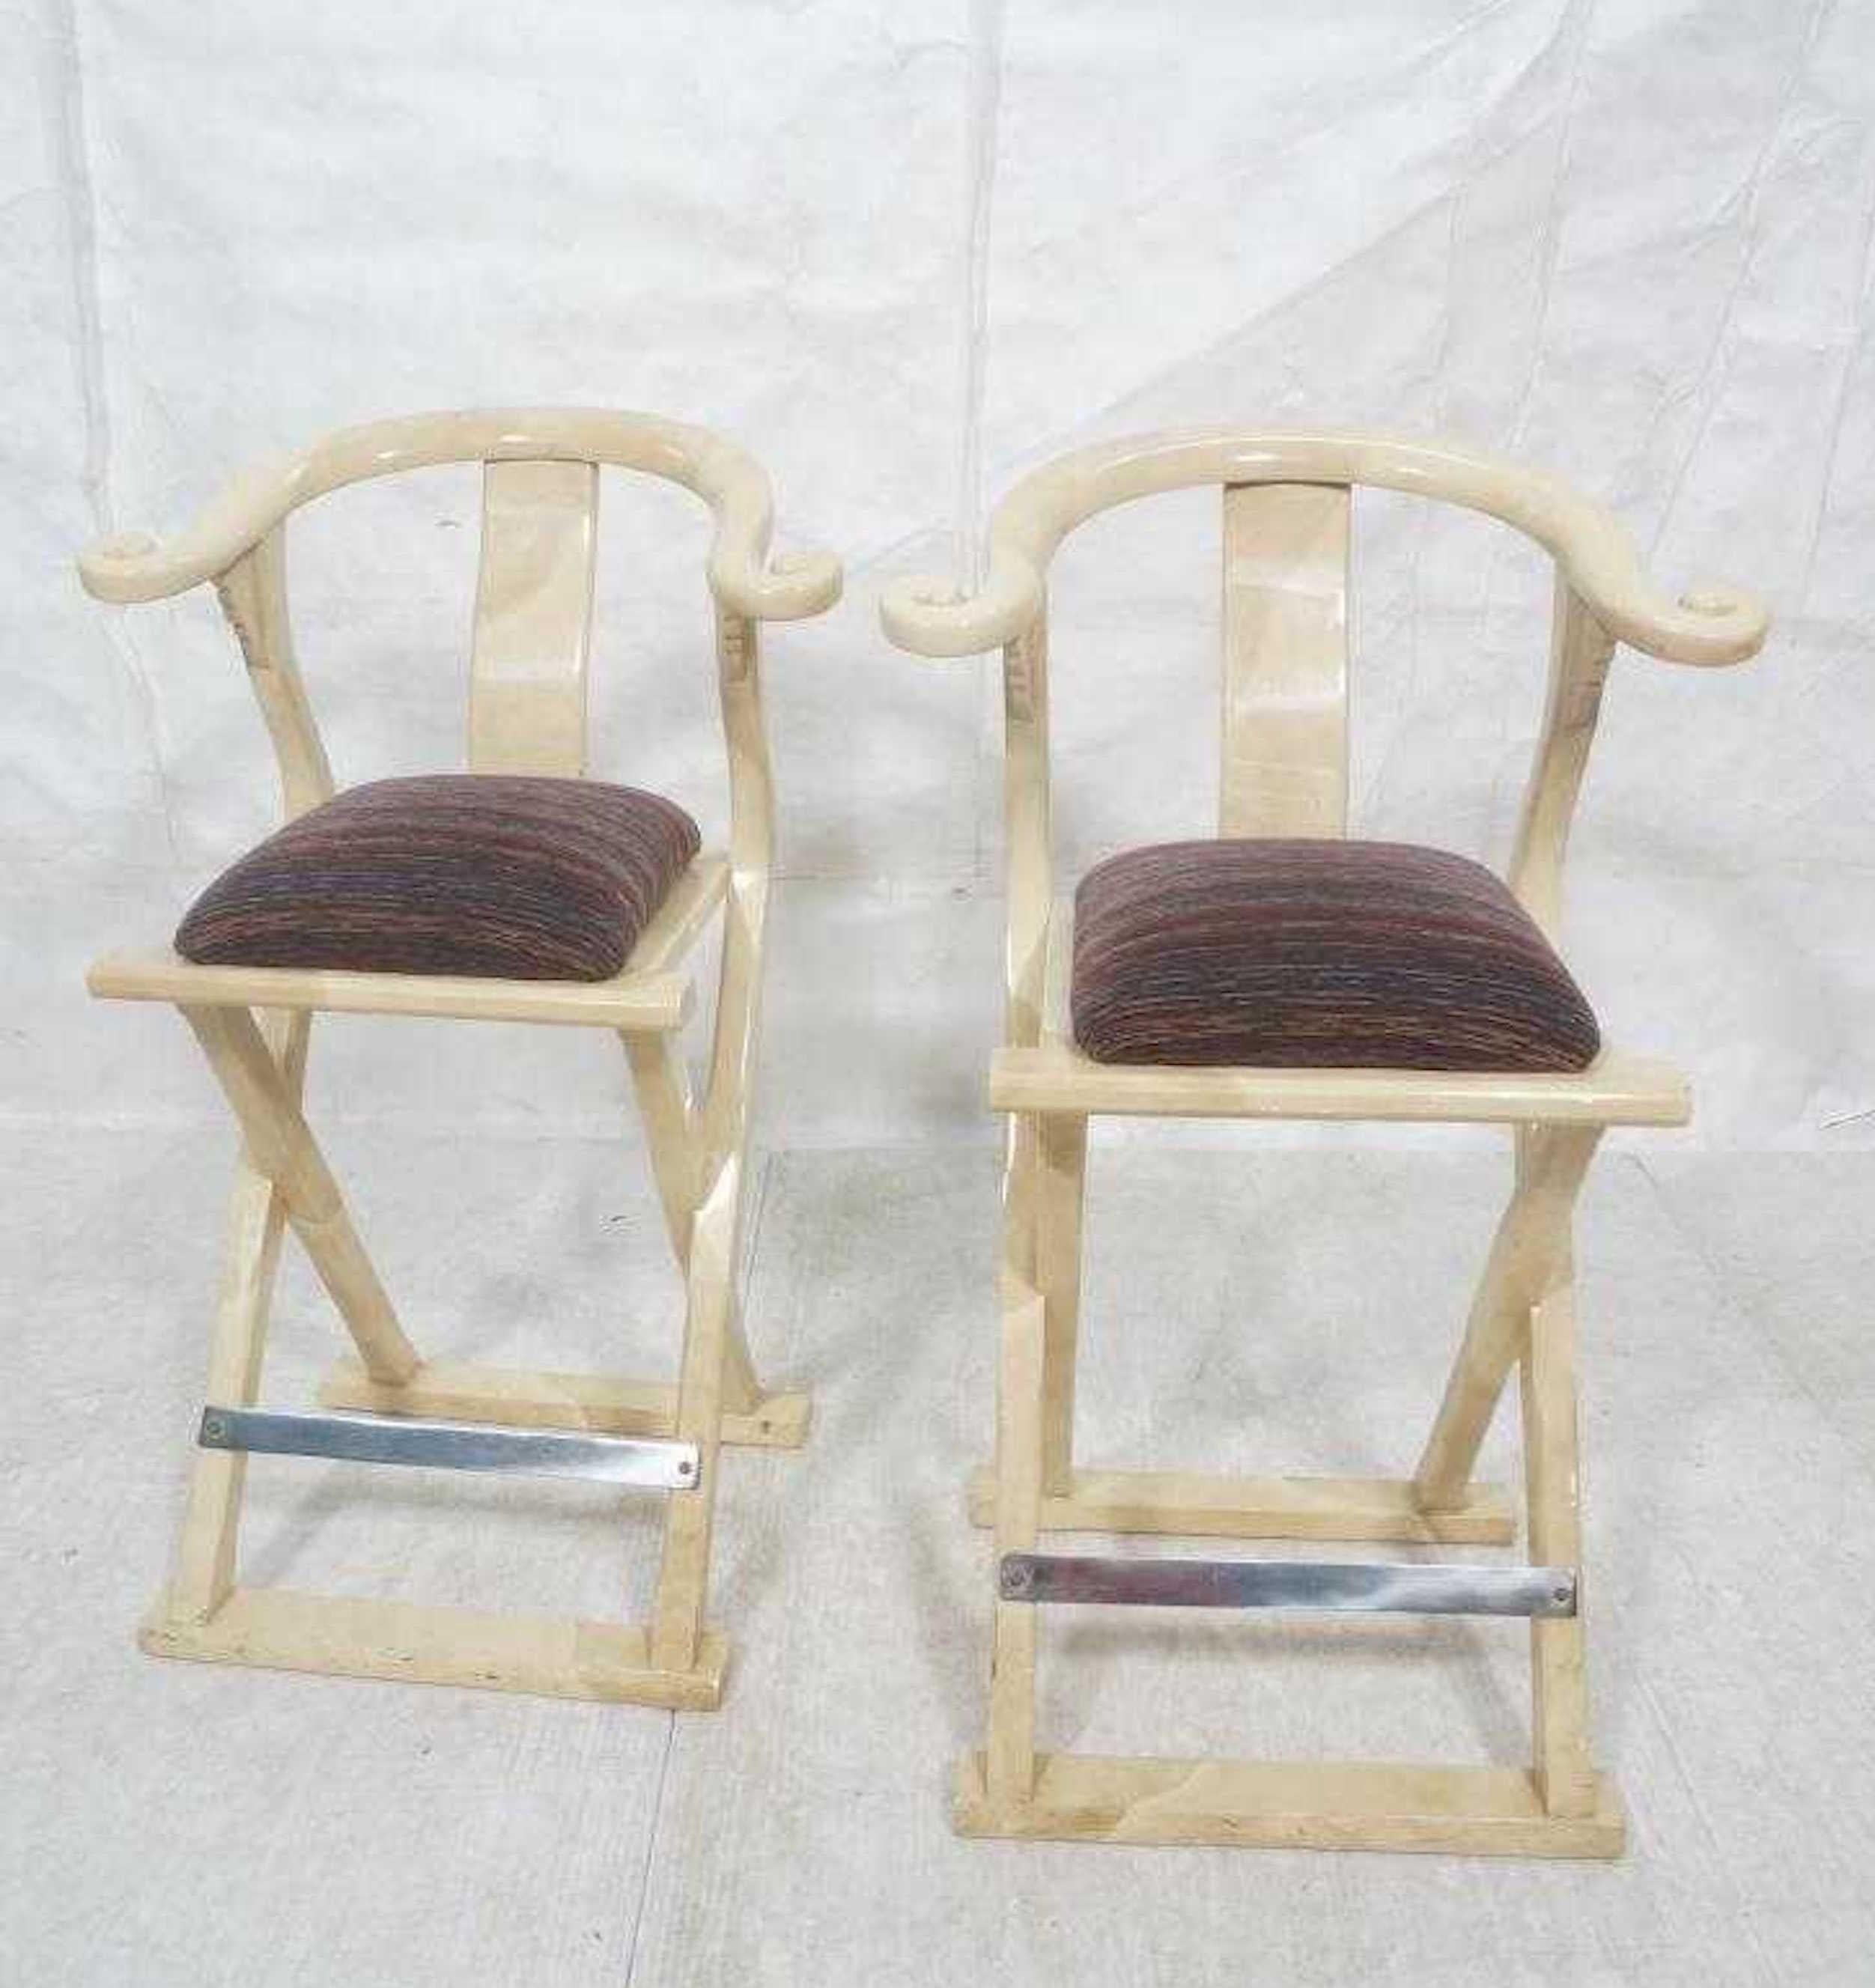 Pair of Goatskin-Parchment Yoke bar stools by Enrique Garcel, ready for upholstery in COM
Measures: 42” H x 27” W x 20” D
Seat height 29